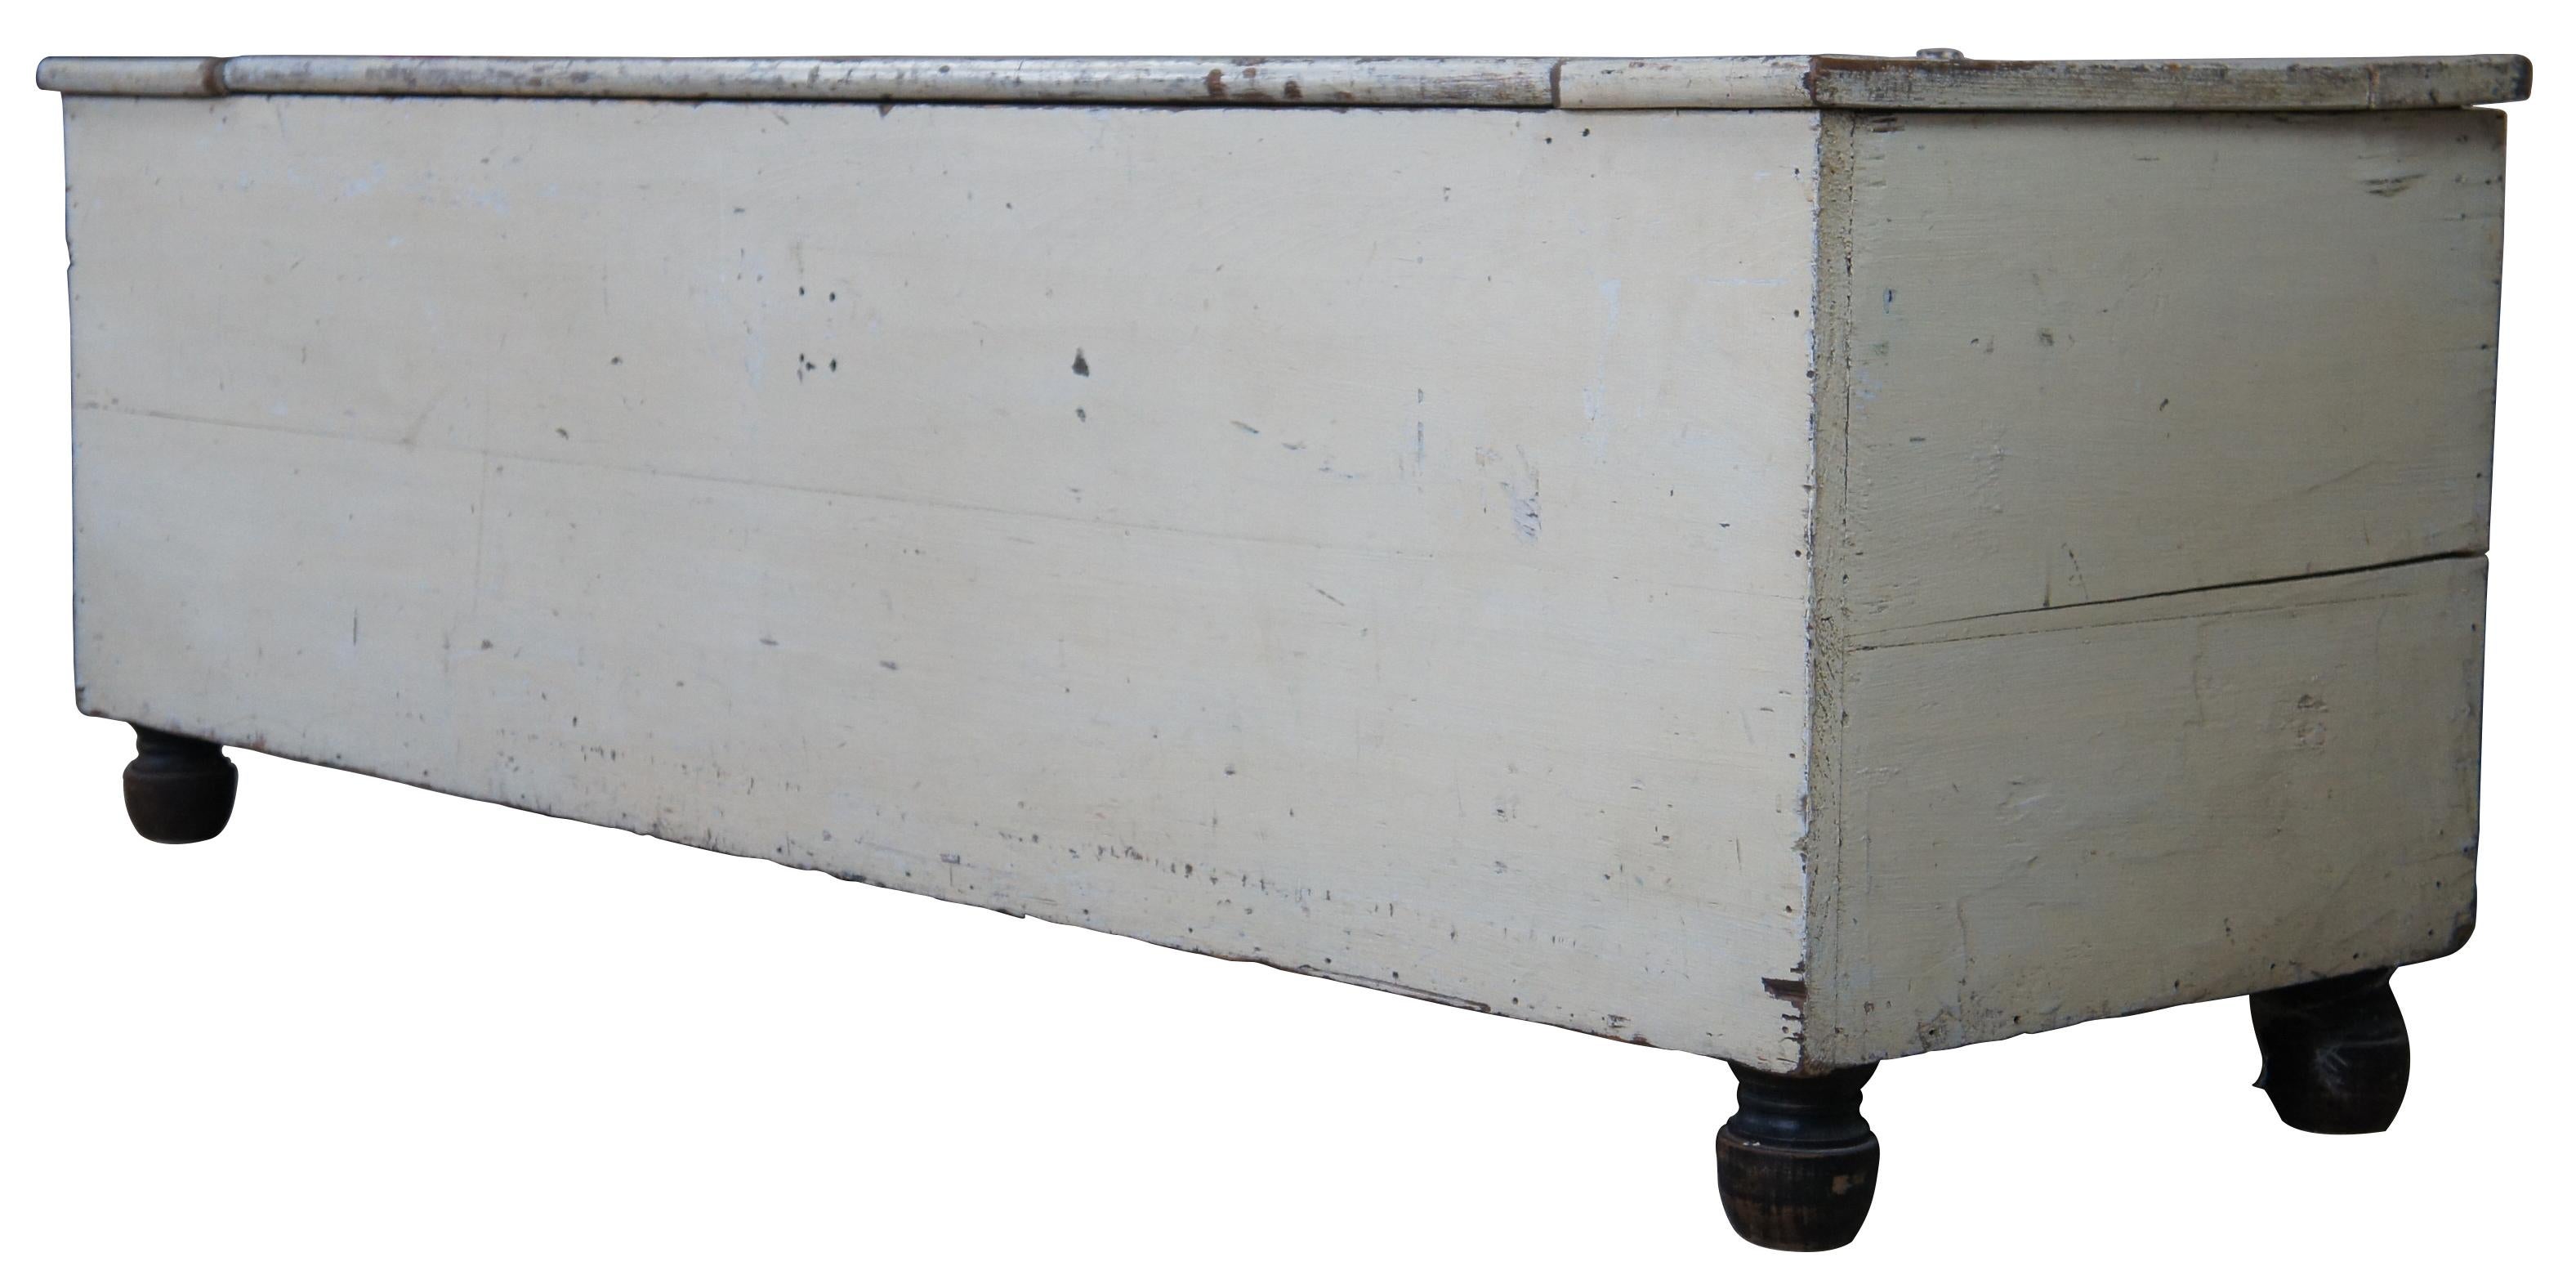 Antique footed pine trunk or bench. Made of pine featuring a distressed white painted patina over bun feet.
 